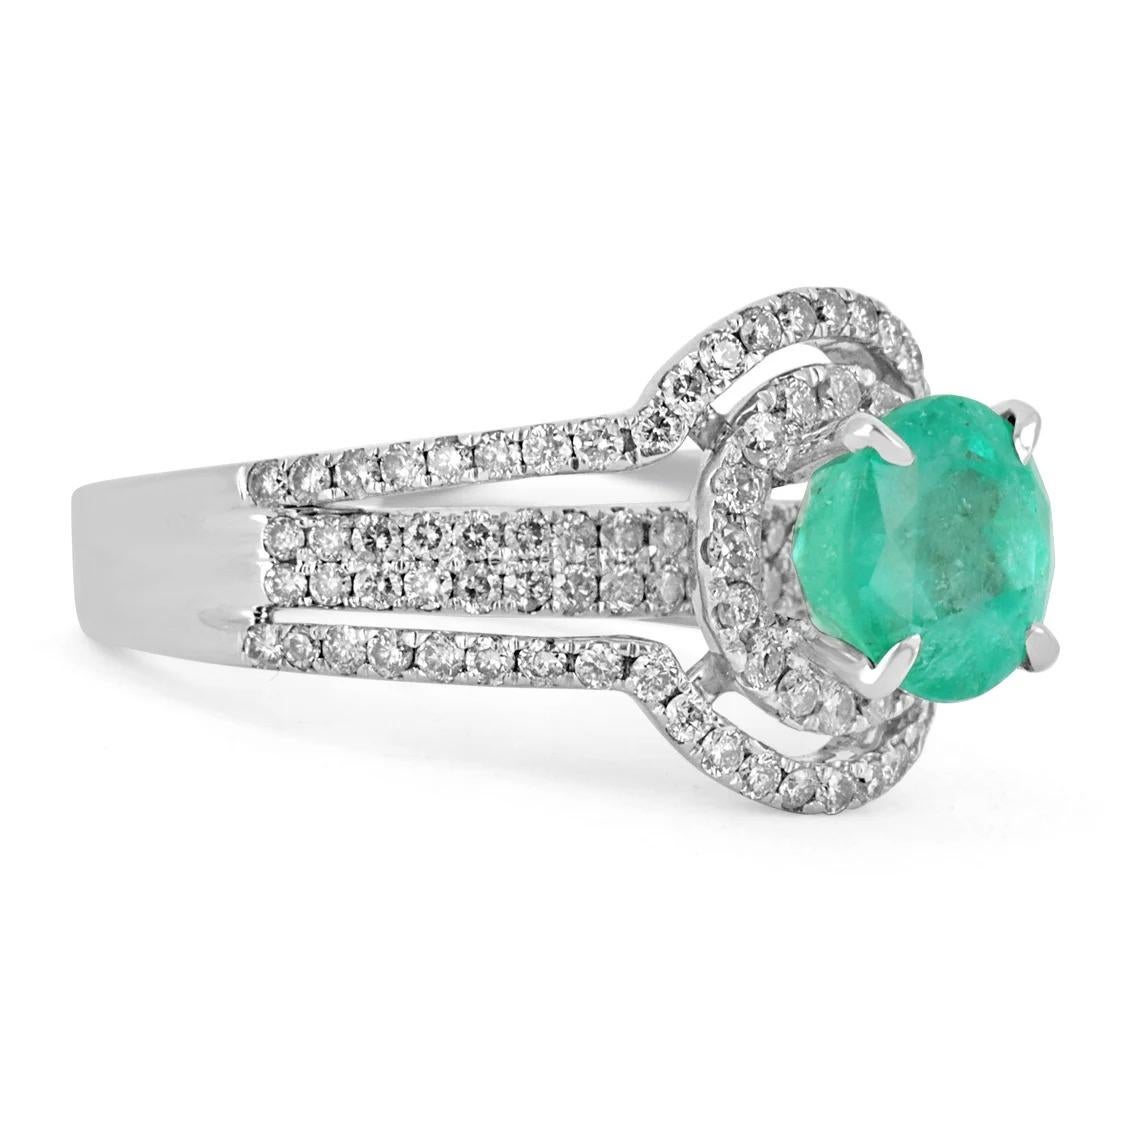 Be prepared to receive many compliments on this beauty! This is a magnificent 1.34tcw natural Colombian emerald and diamond split shank engagement ring. This is a perfect statement ring with a gorgeous center stone. The center gemstone is a fine